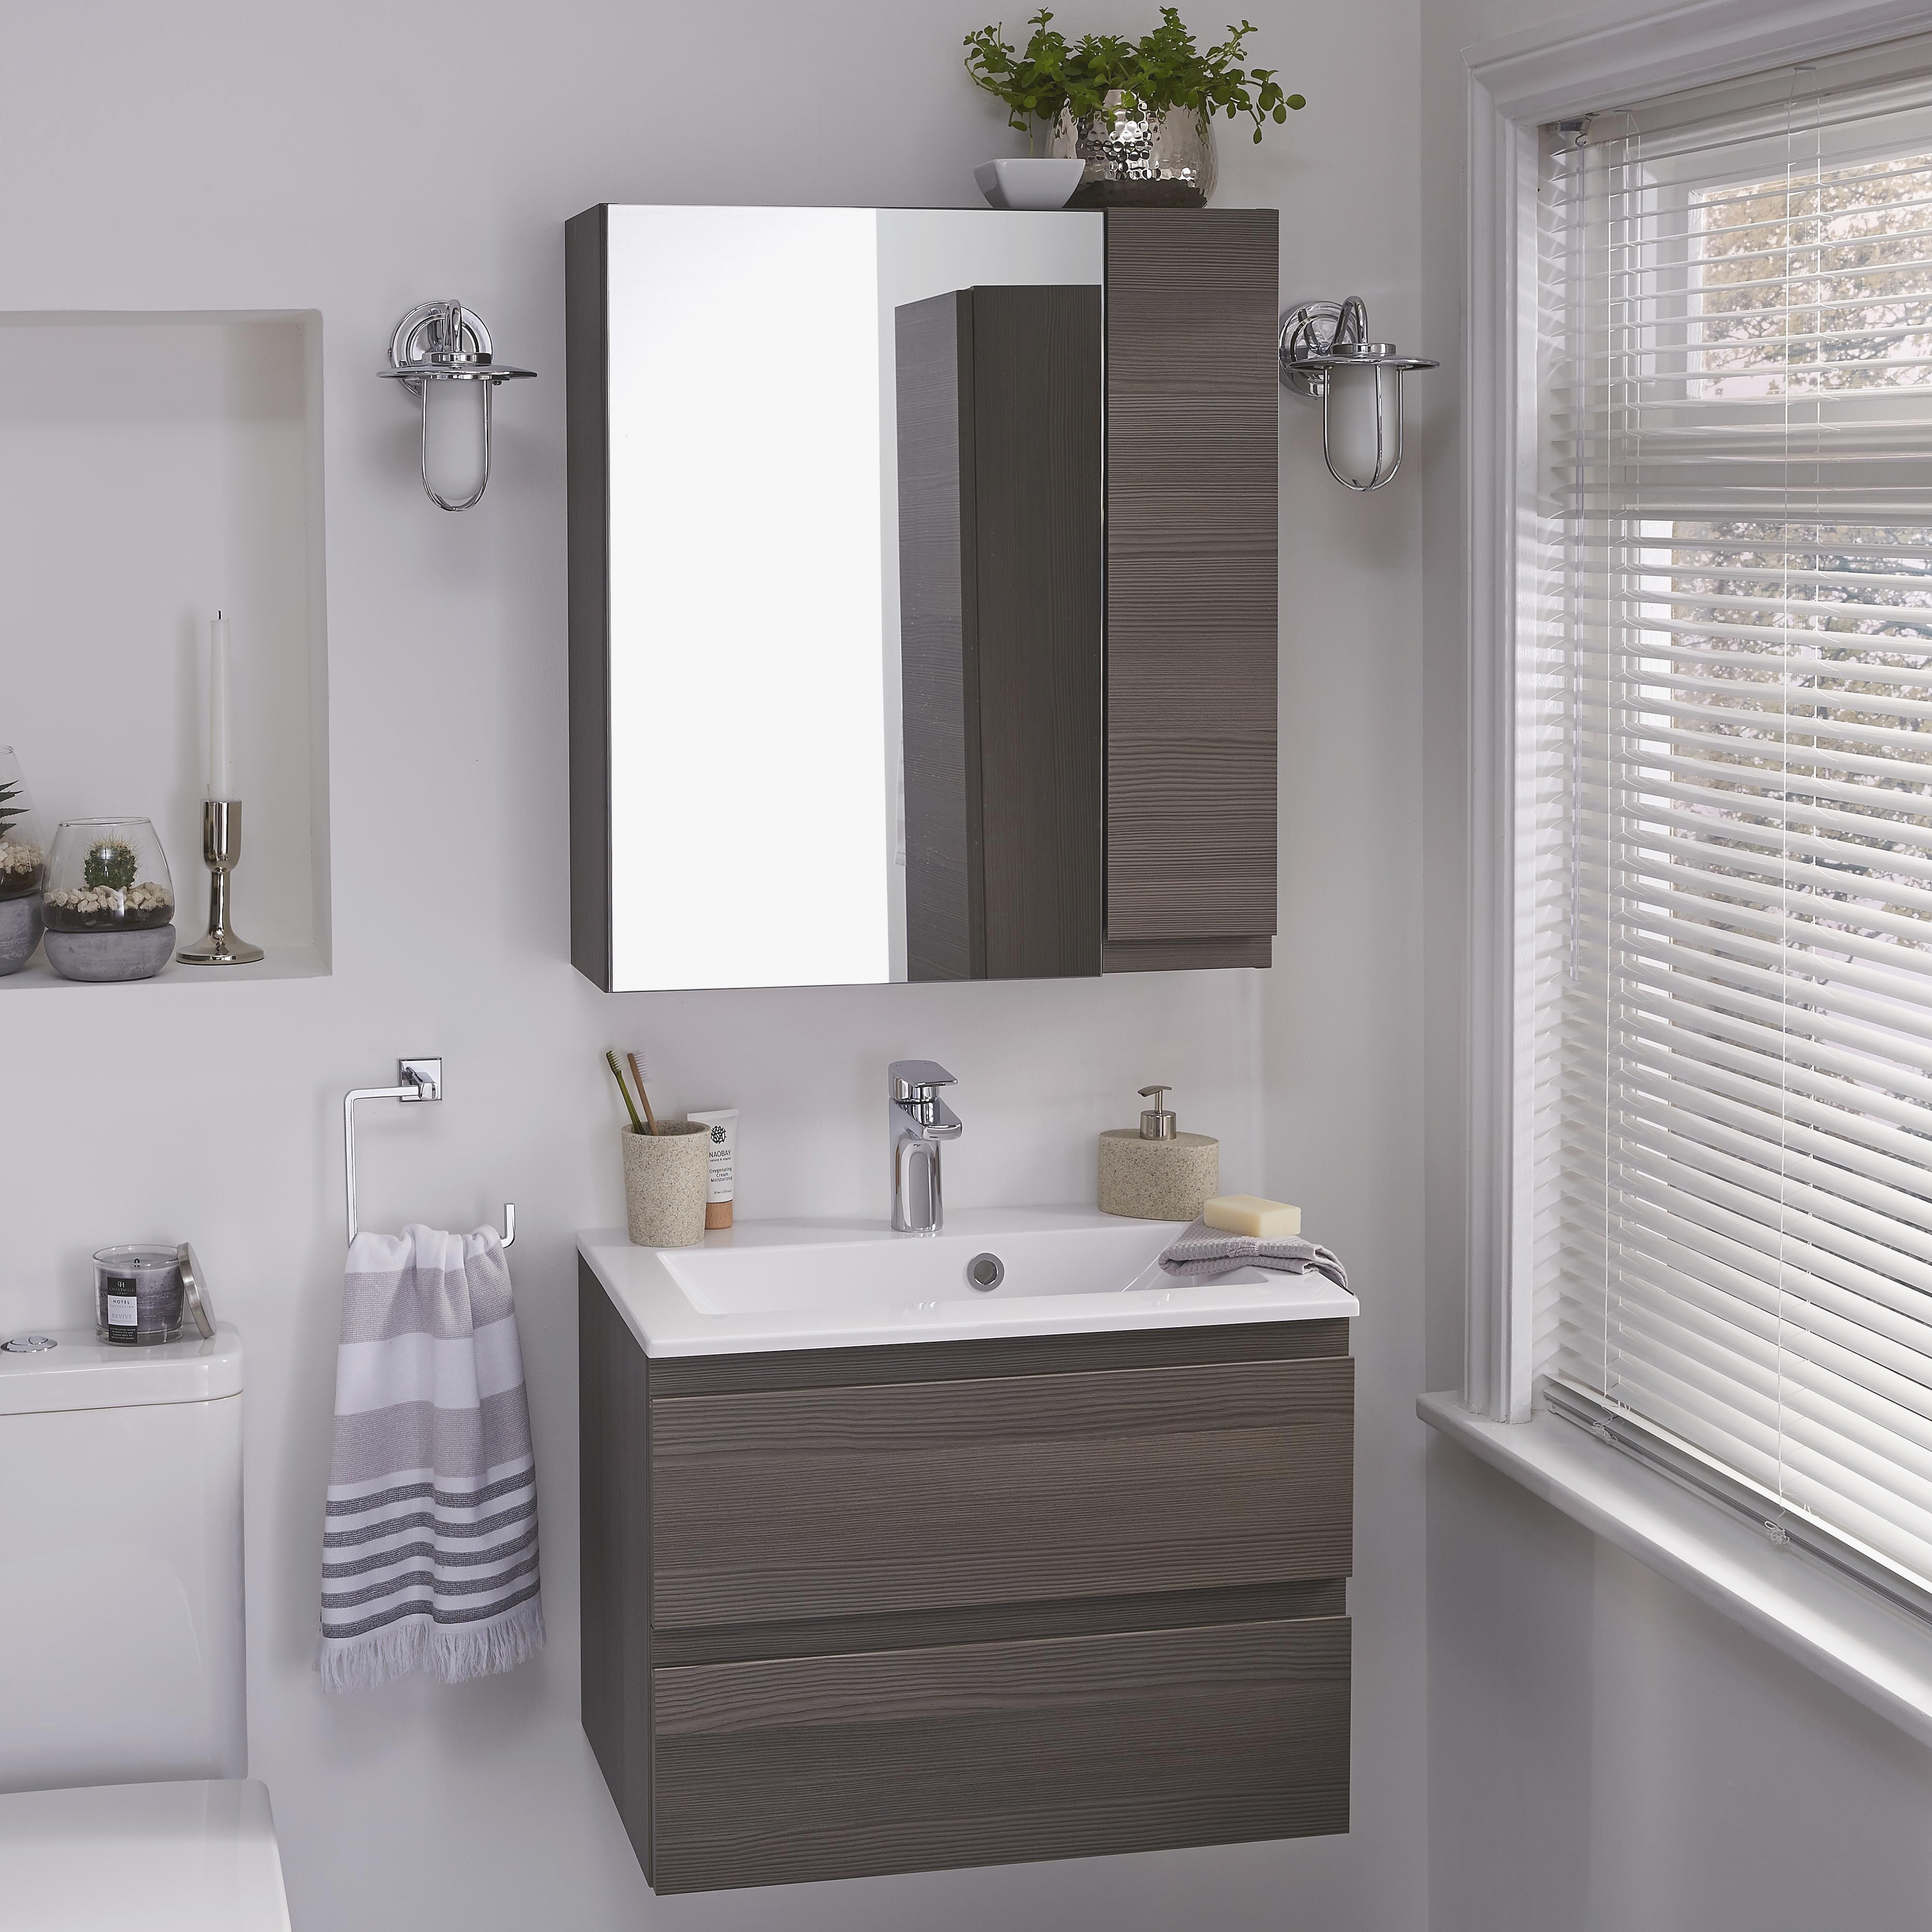 Tall Wooden Bathroom Cabinets Luxury Cooke Lewis Paolo Bodega Grey throughout proportions 3731 X 3731